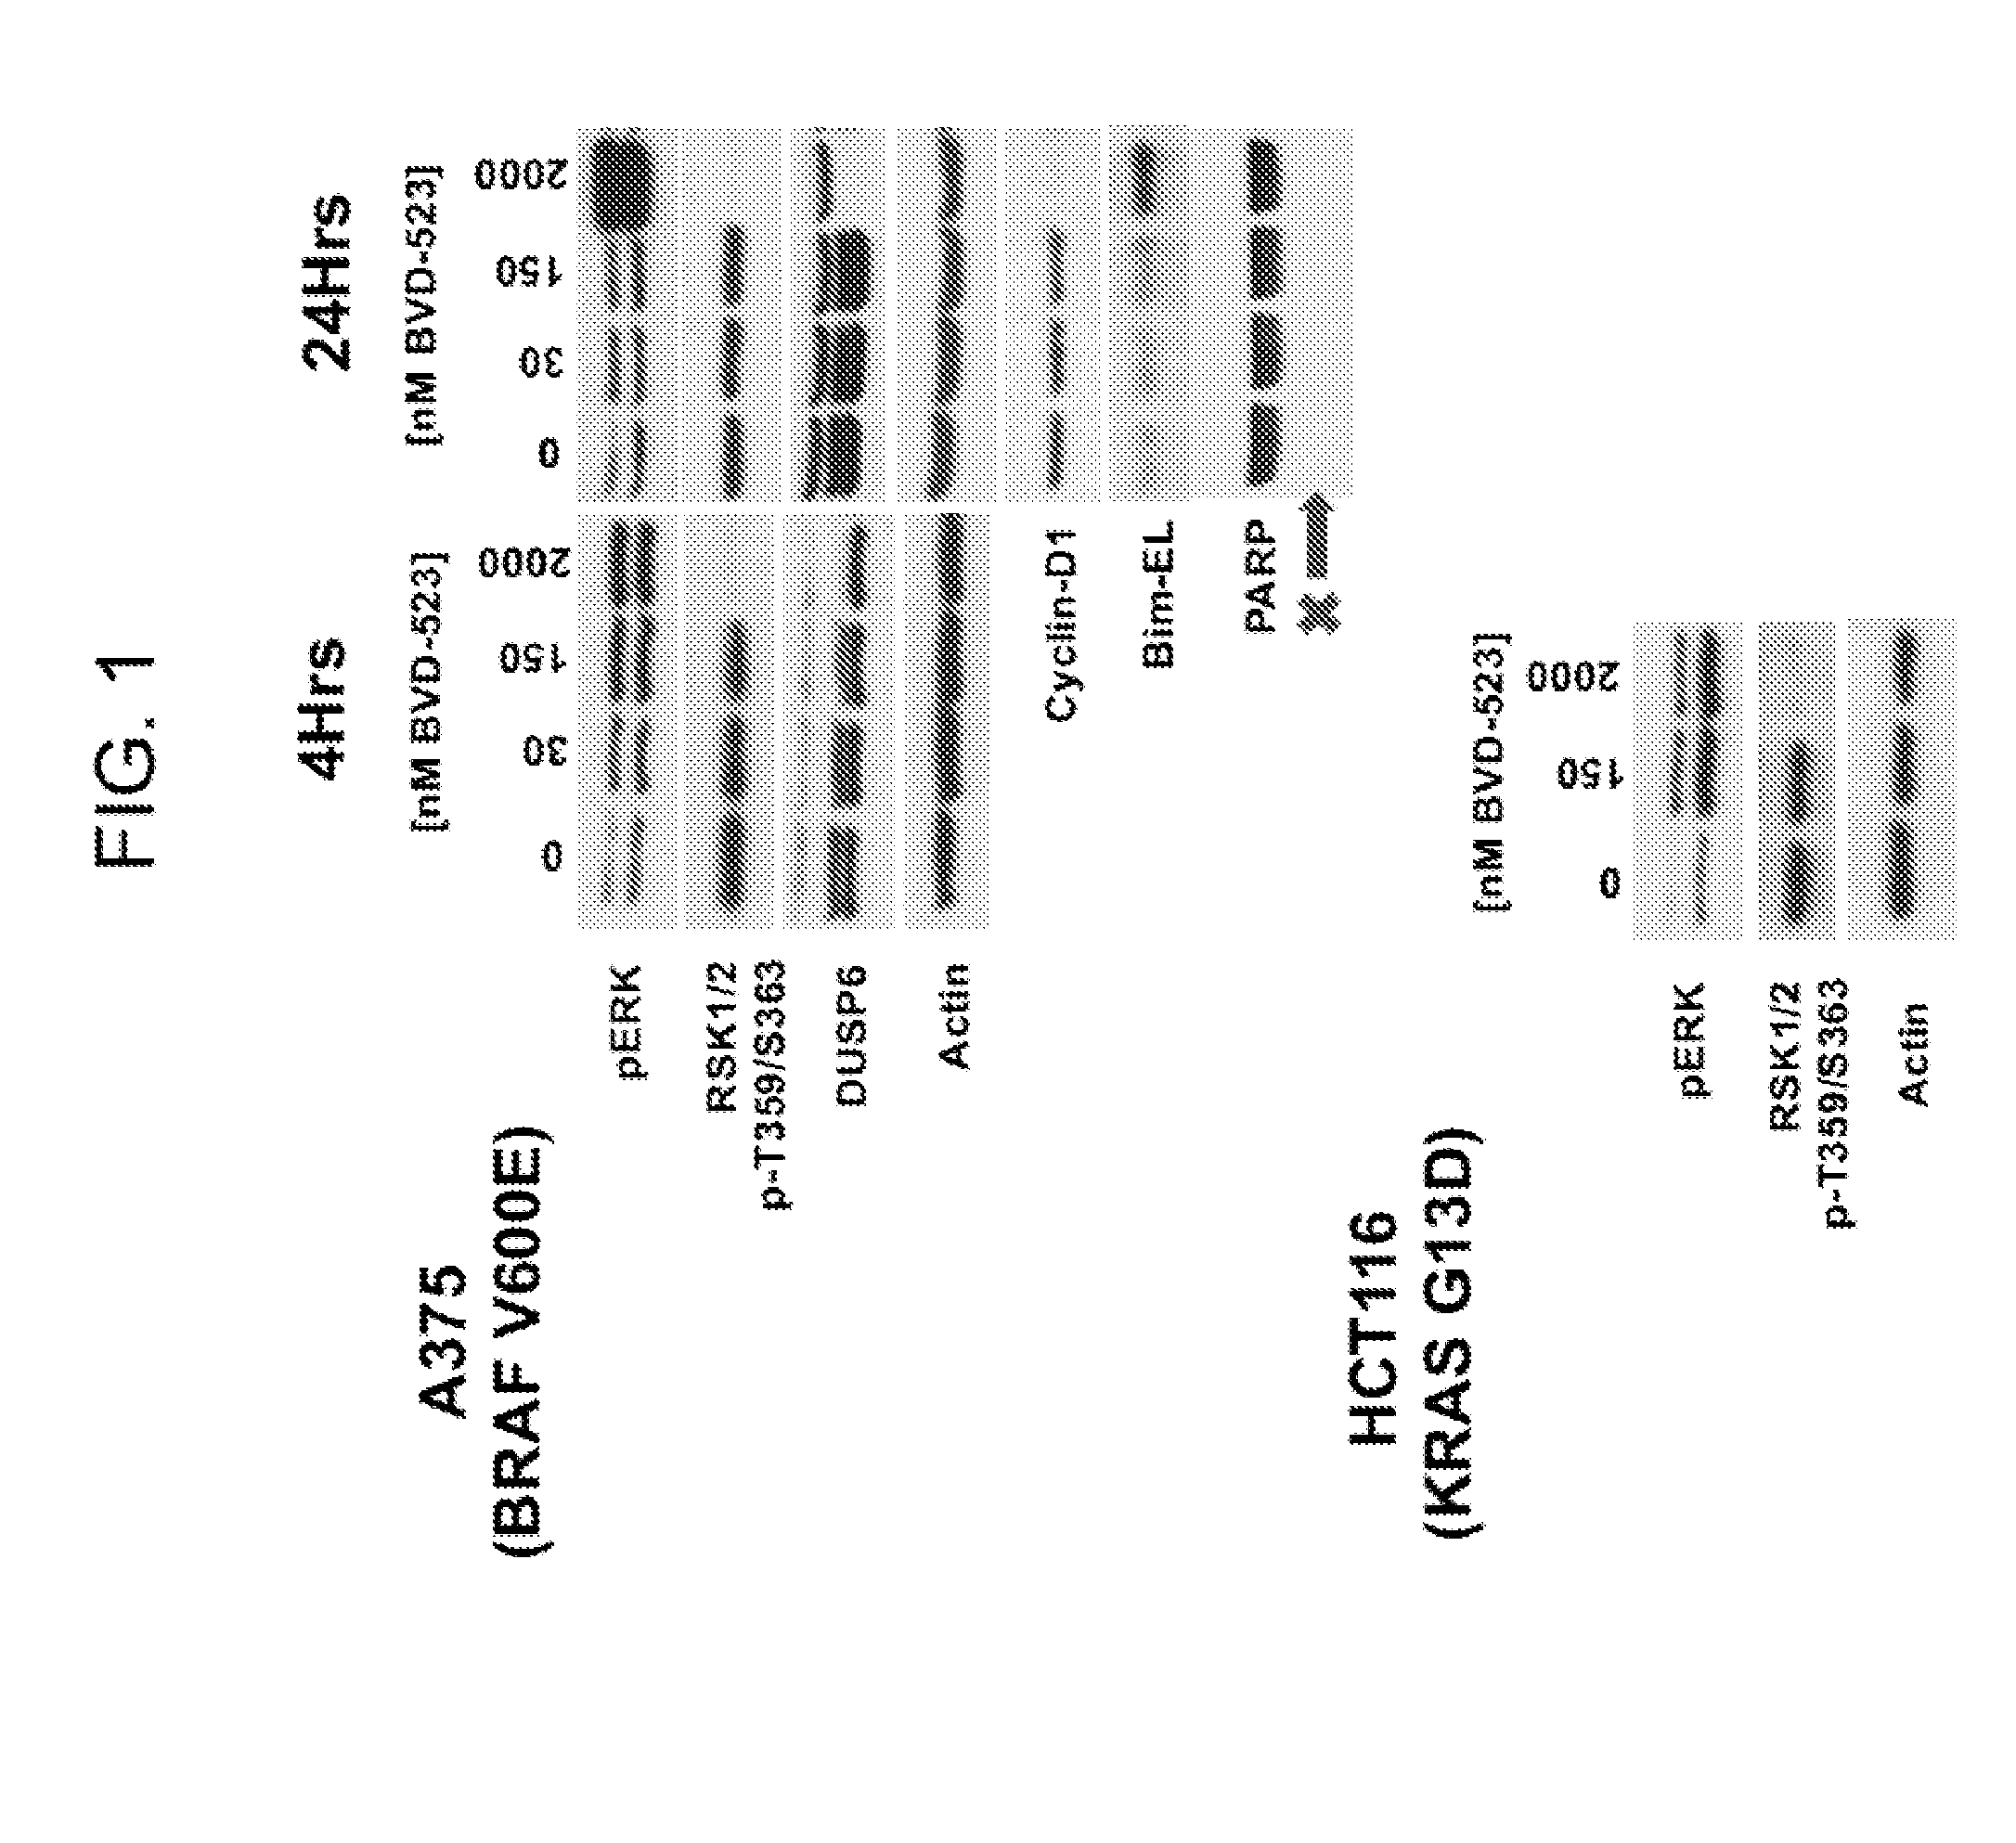 Cancer treatments using combinations of mek type 1 and erk inhibitors